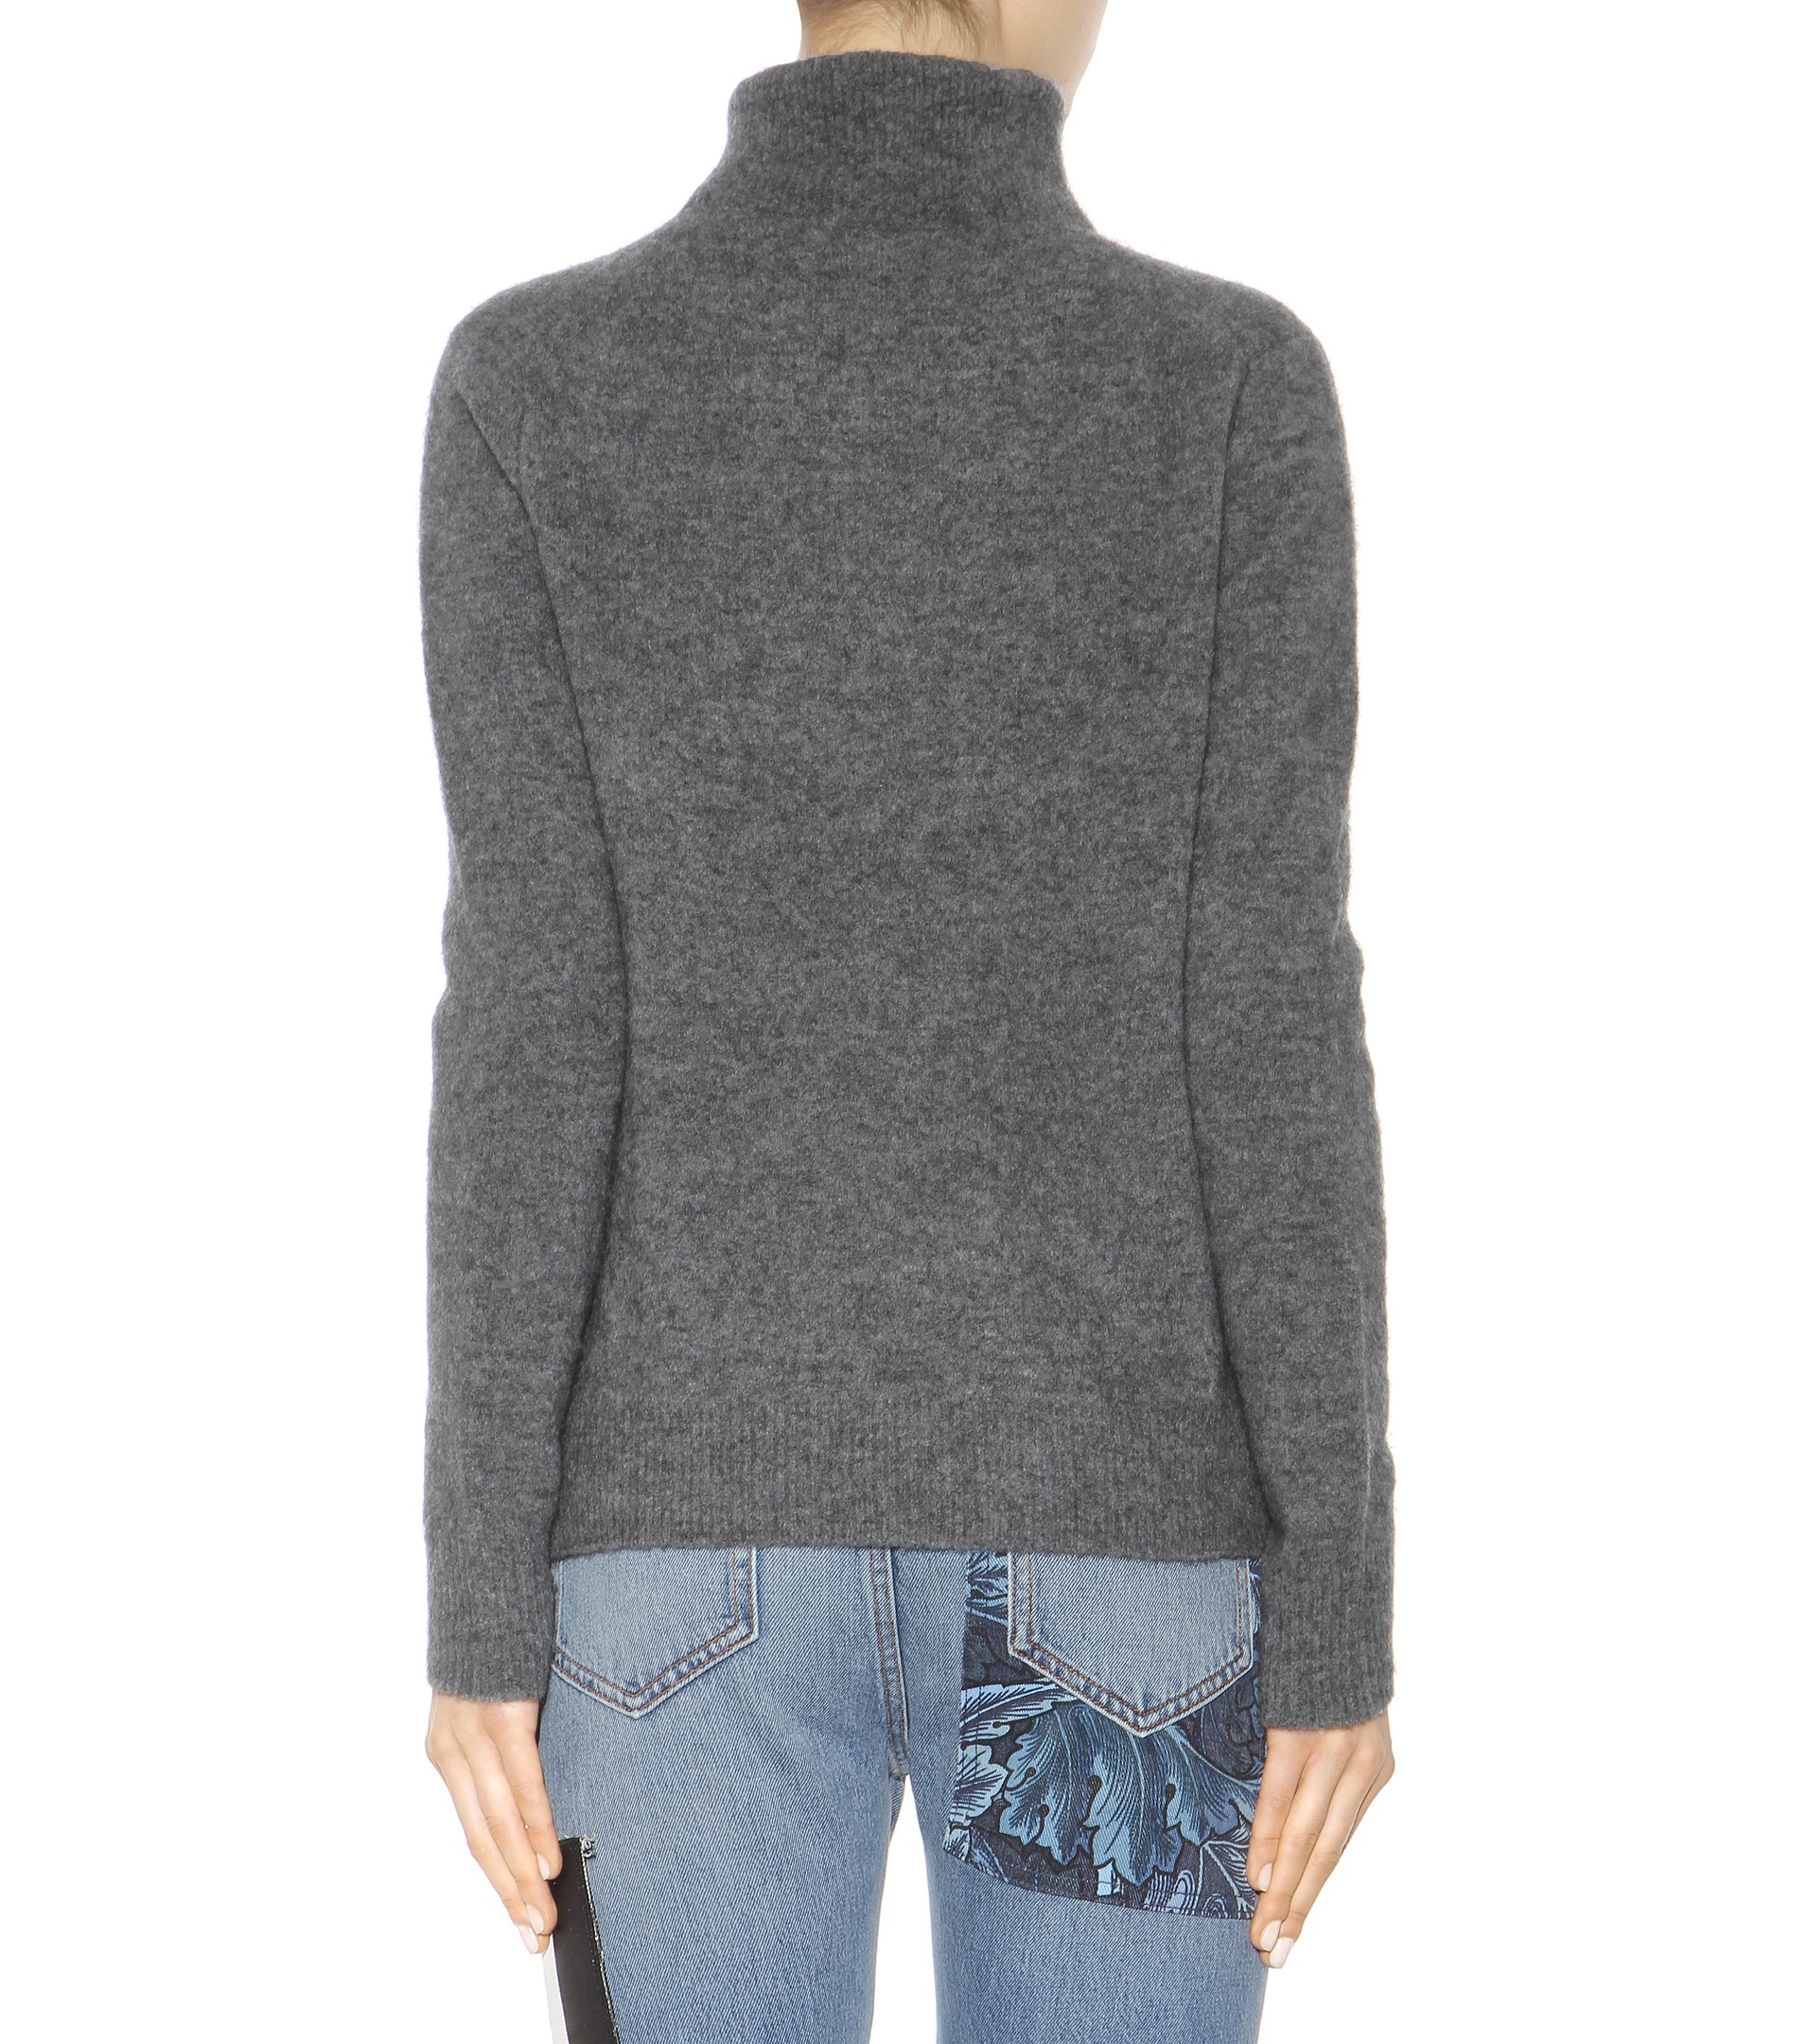 Marc by marc jacobs Wool-blend Turtleneck Sweater in Gray | Lyst